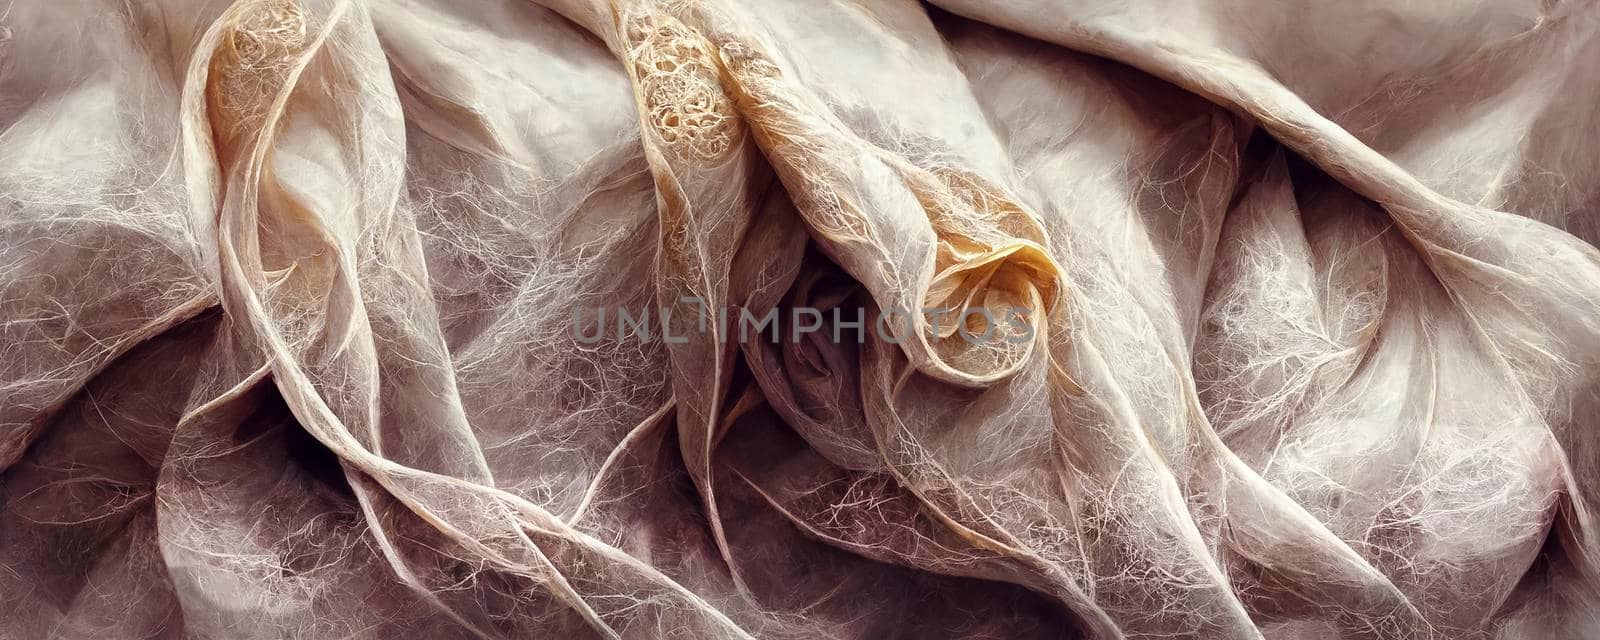 Silk wavy composition. Abstract texture of silk chiffon fabric in champagne color. Silk fabric mockup as artistic layout background. by jbruiz78